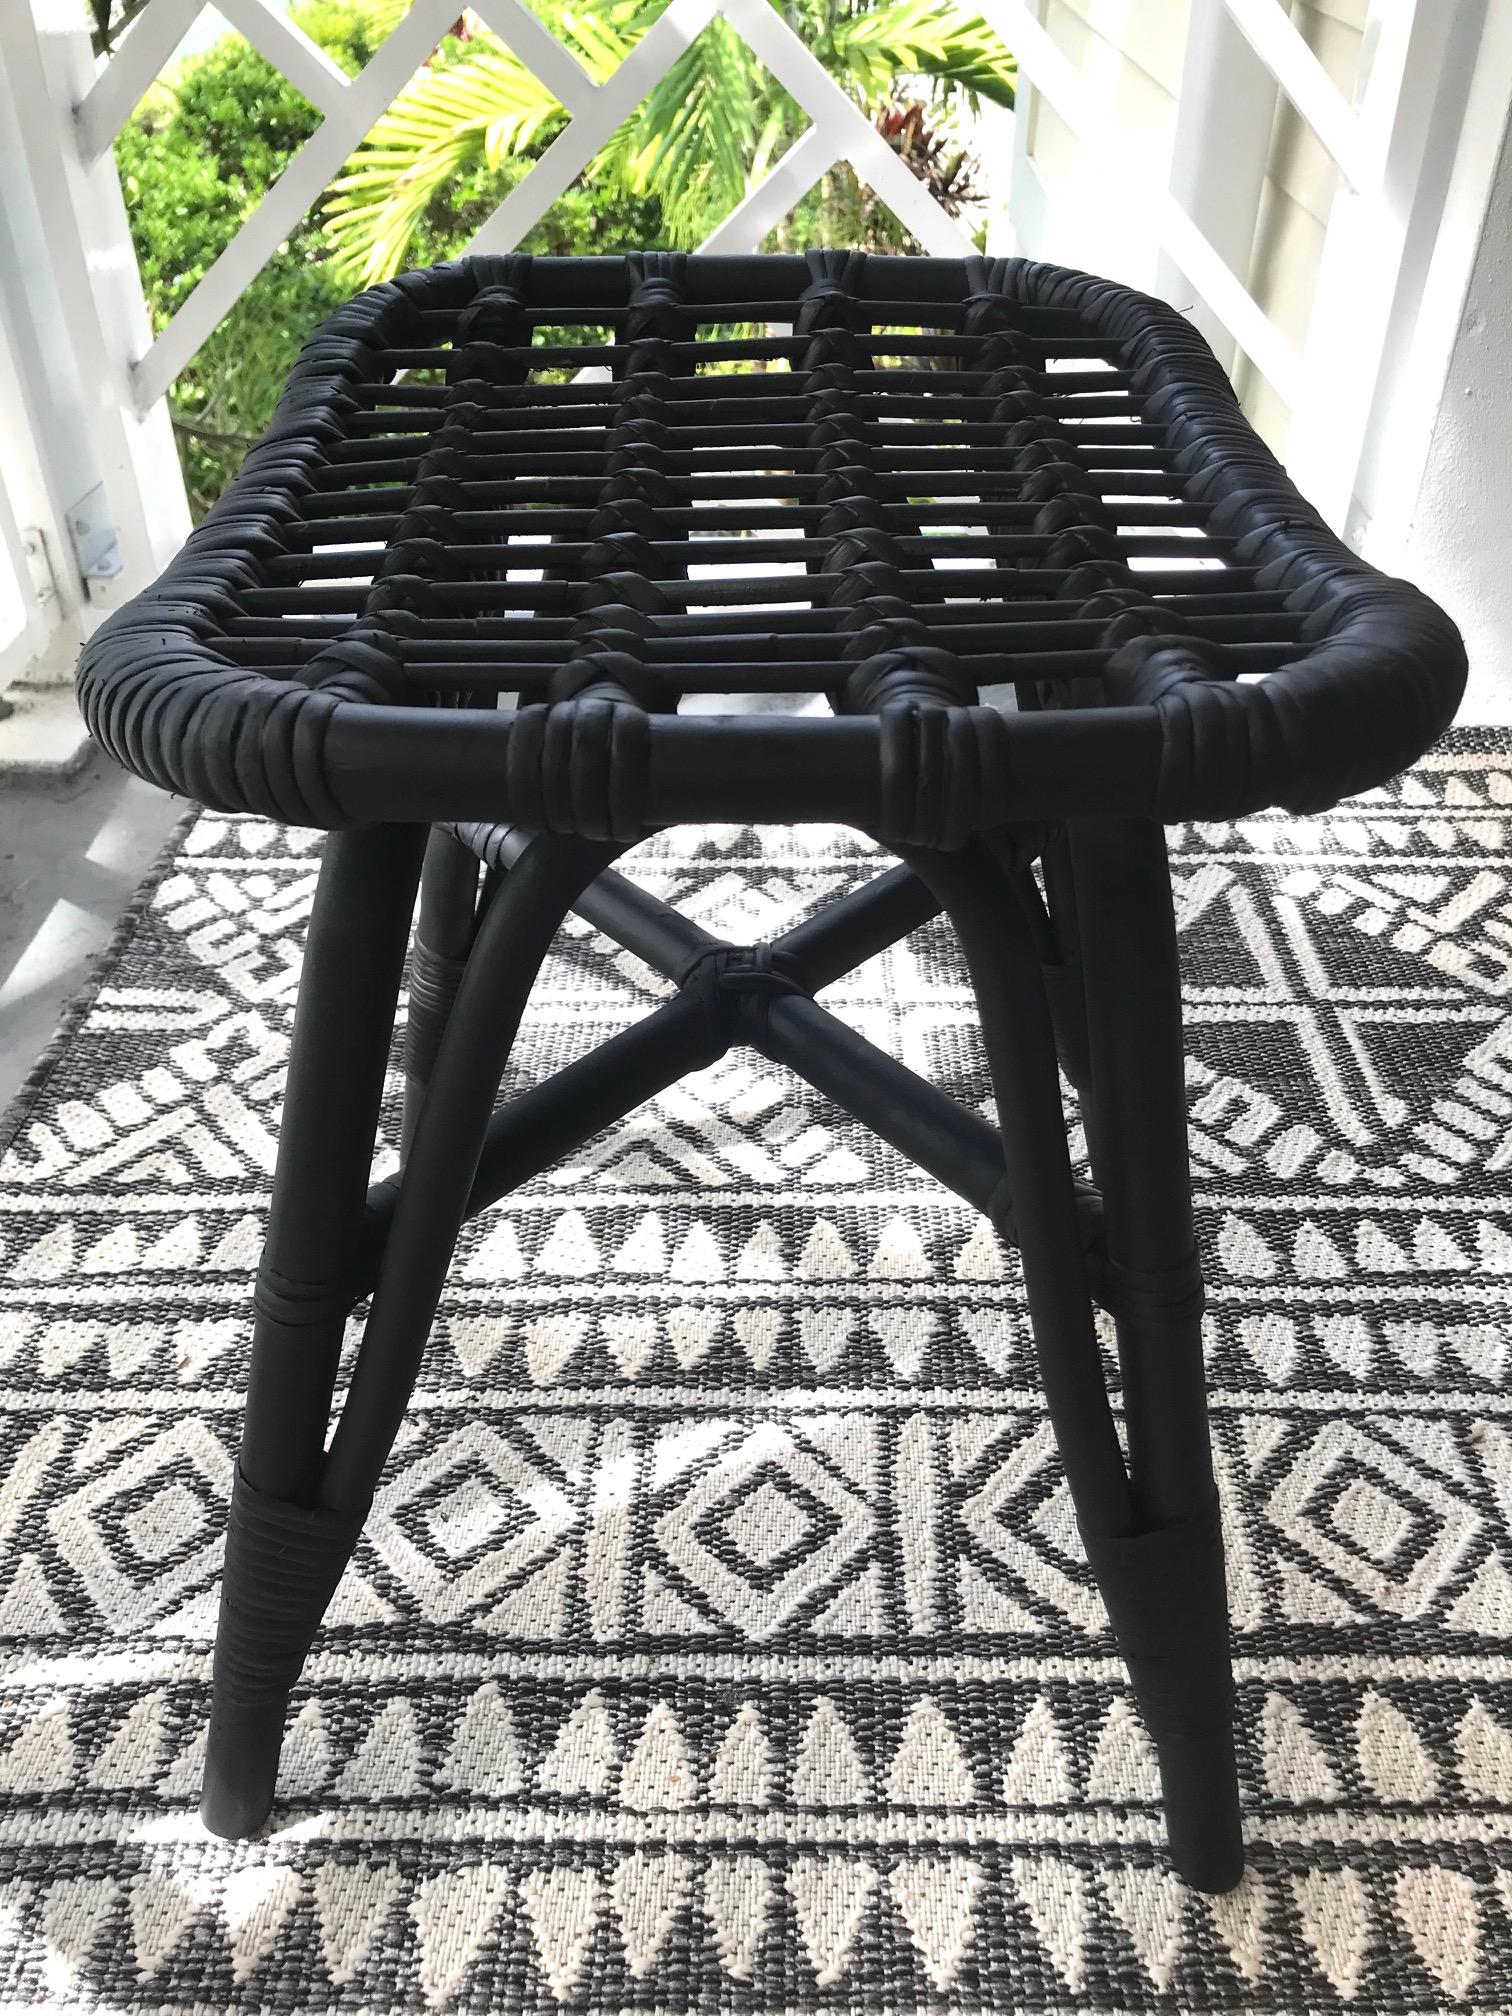 1970s Vintage Indonesian Black Bamboo and Rattan Stool or Ottoman 2